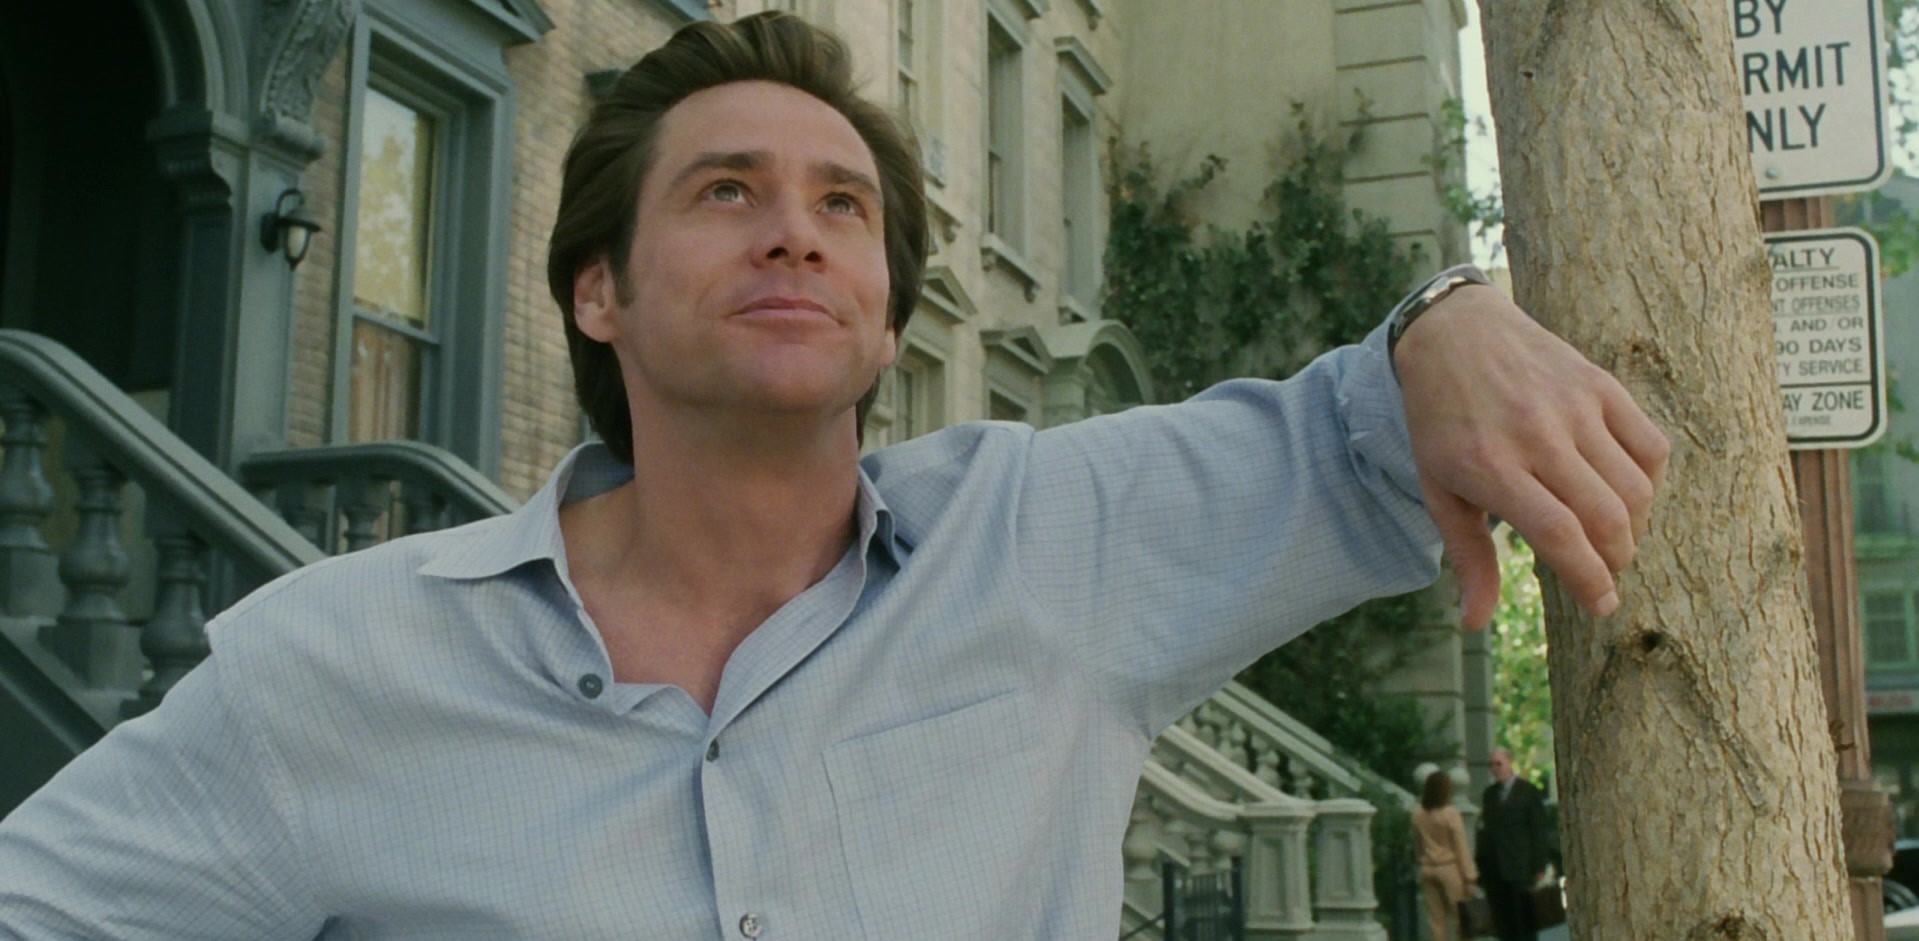 Bruce Almighty: Where Was the 2003 Movie Filmed?